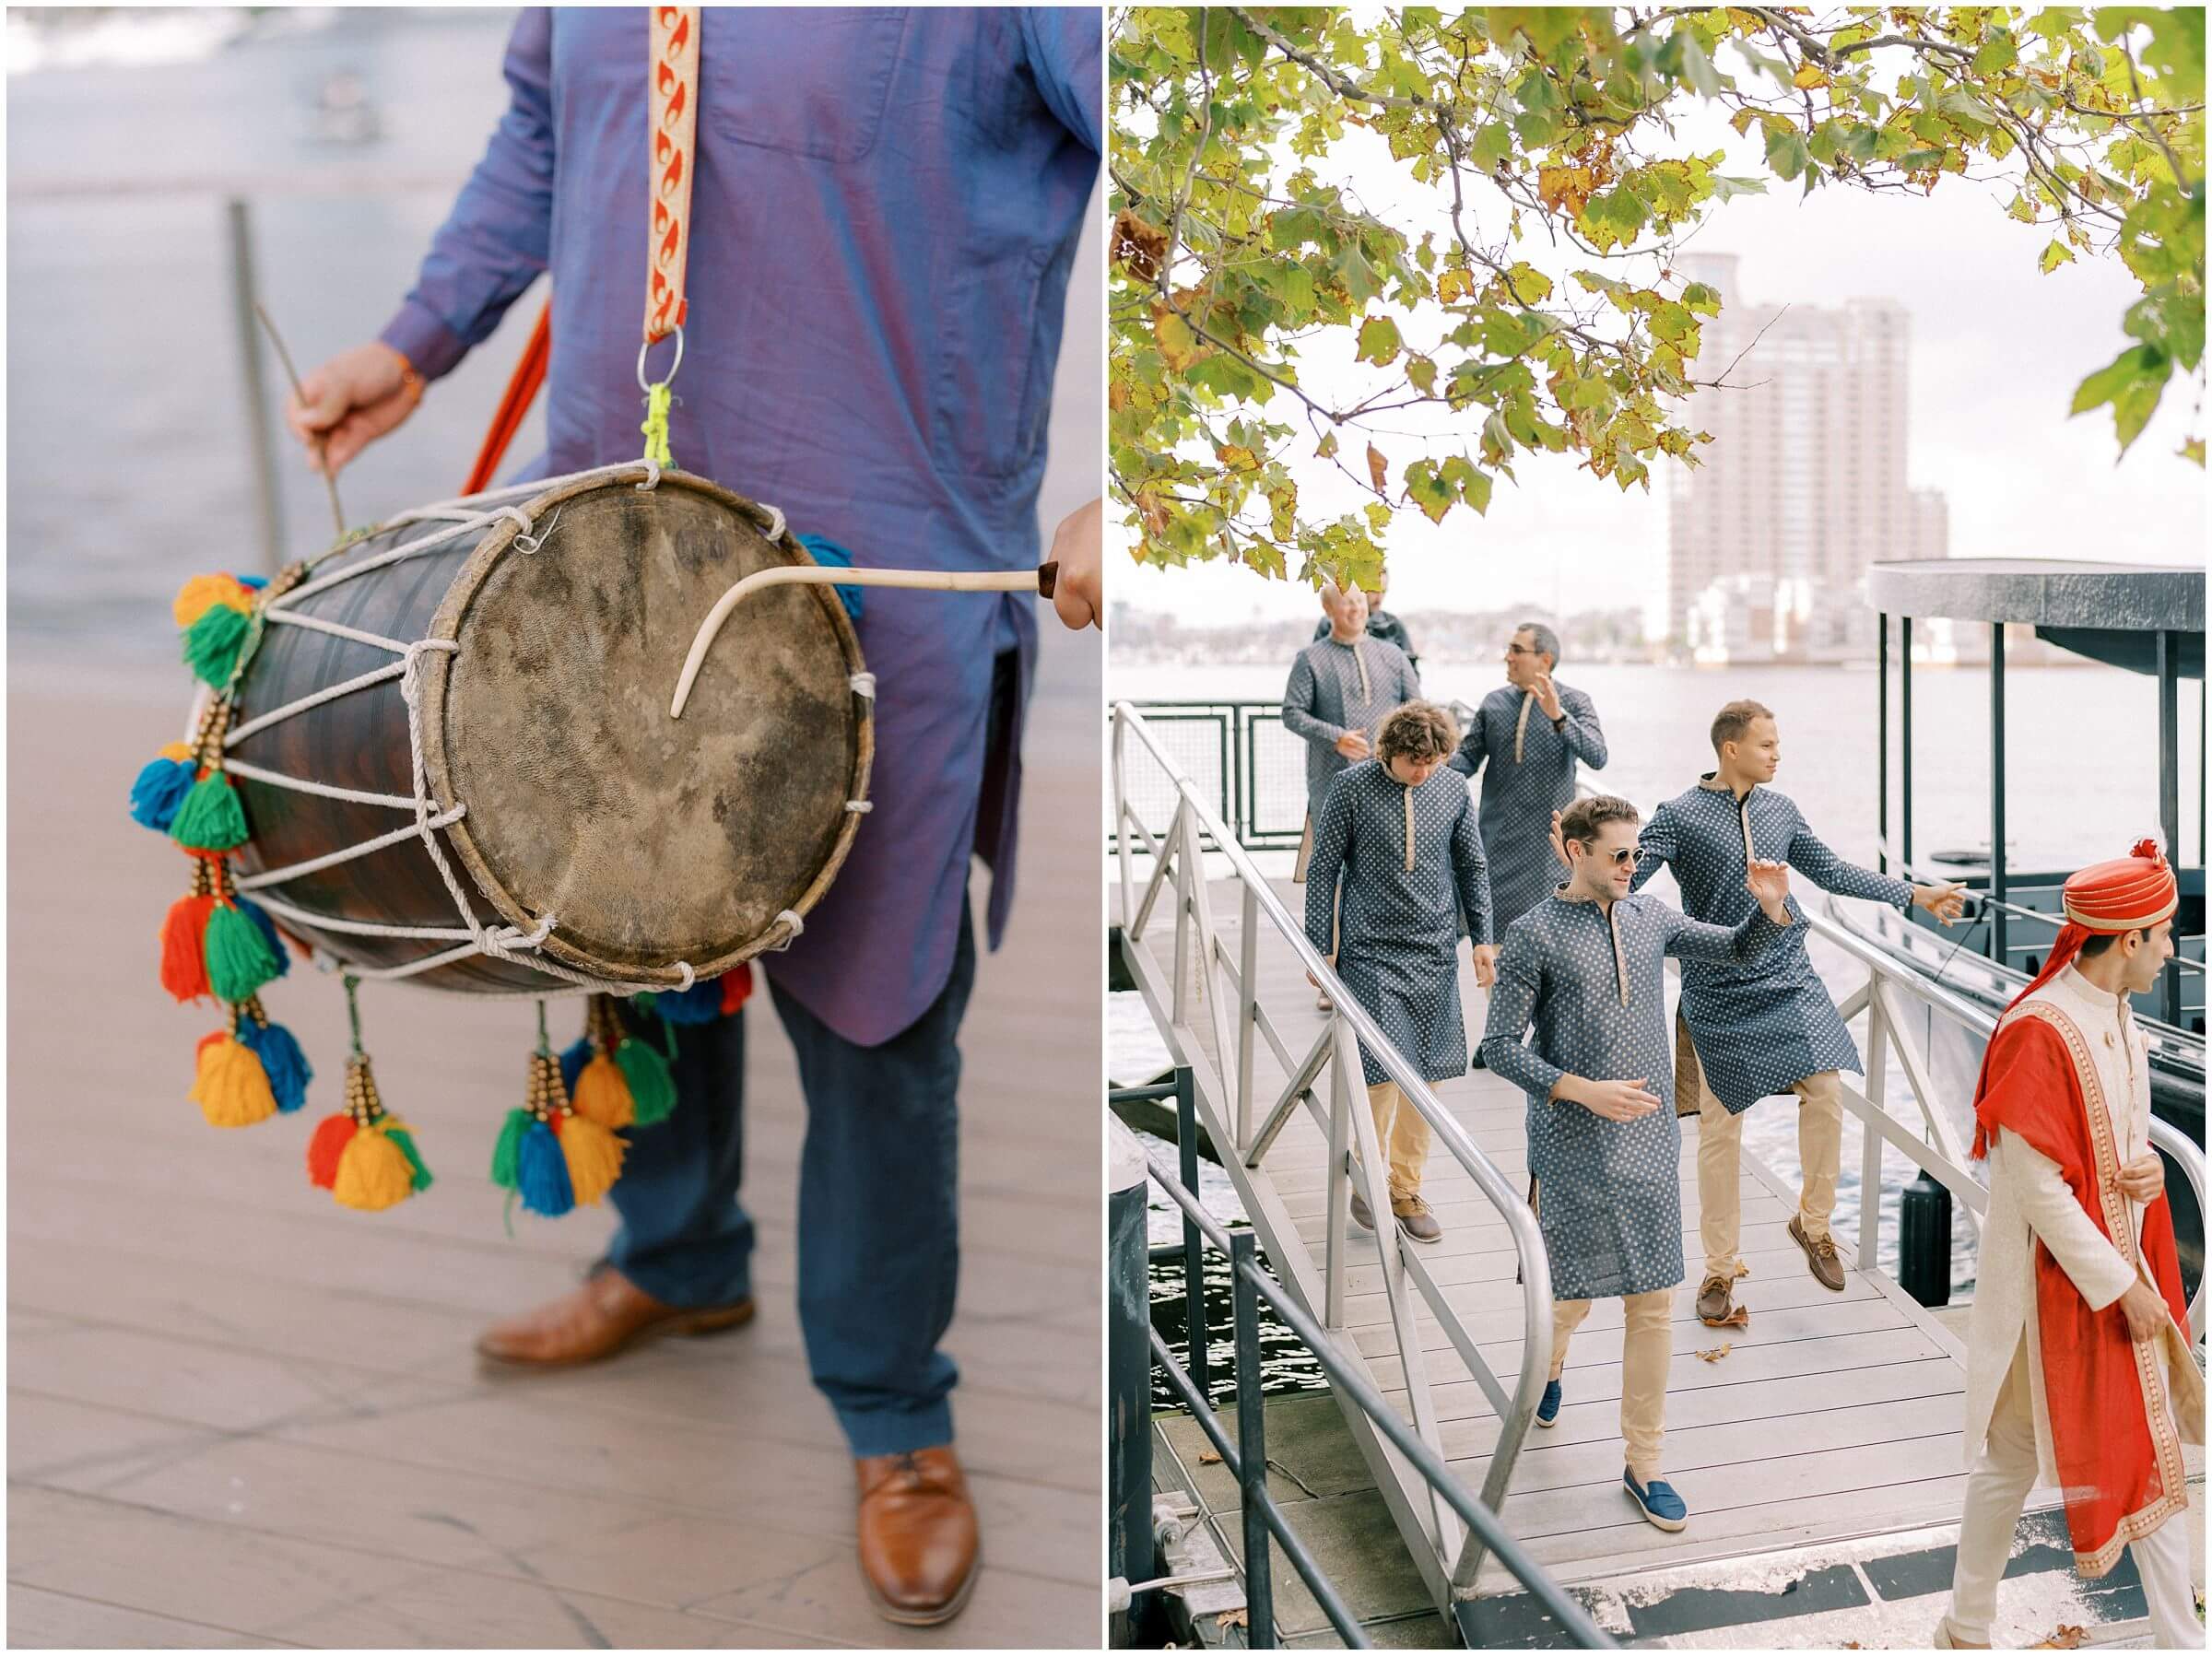 Baraat wedding festivities in the Inner Harbor of Baltimore. Photographed by multicultural wedding photographer Winnie Dora Photography.